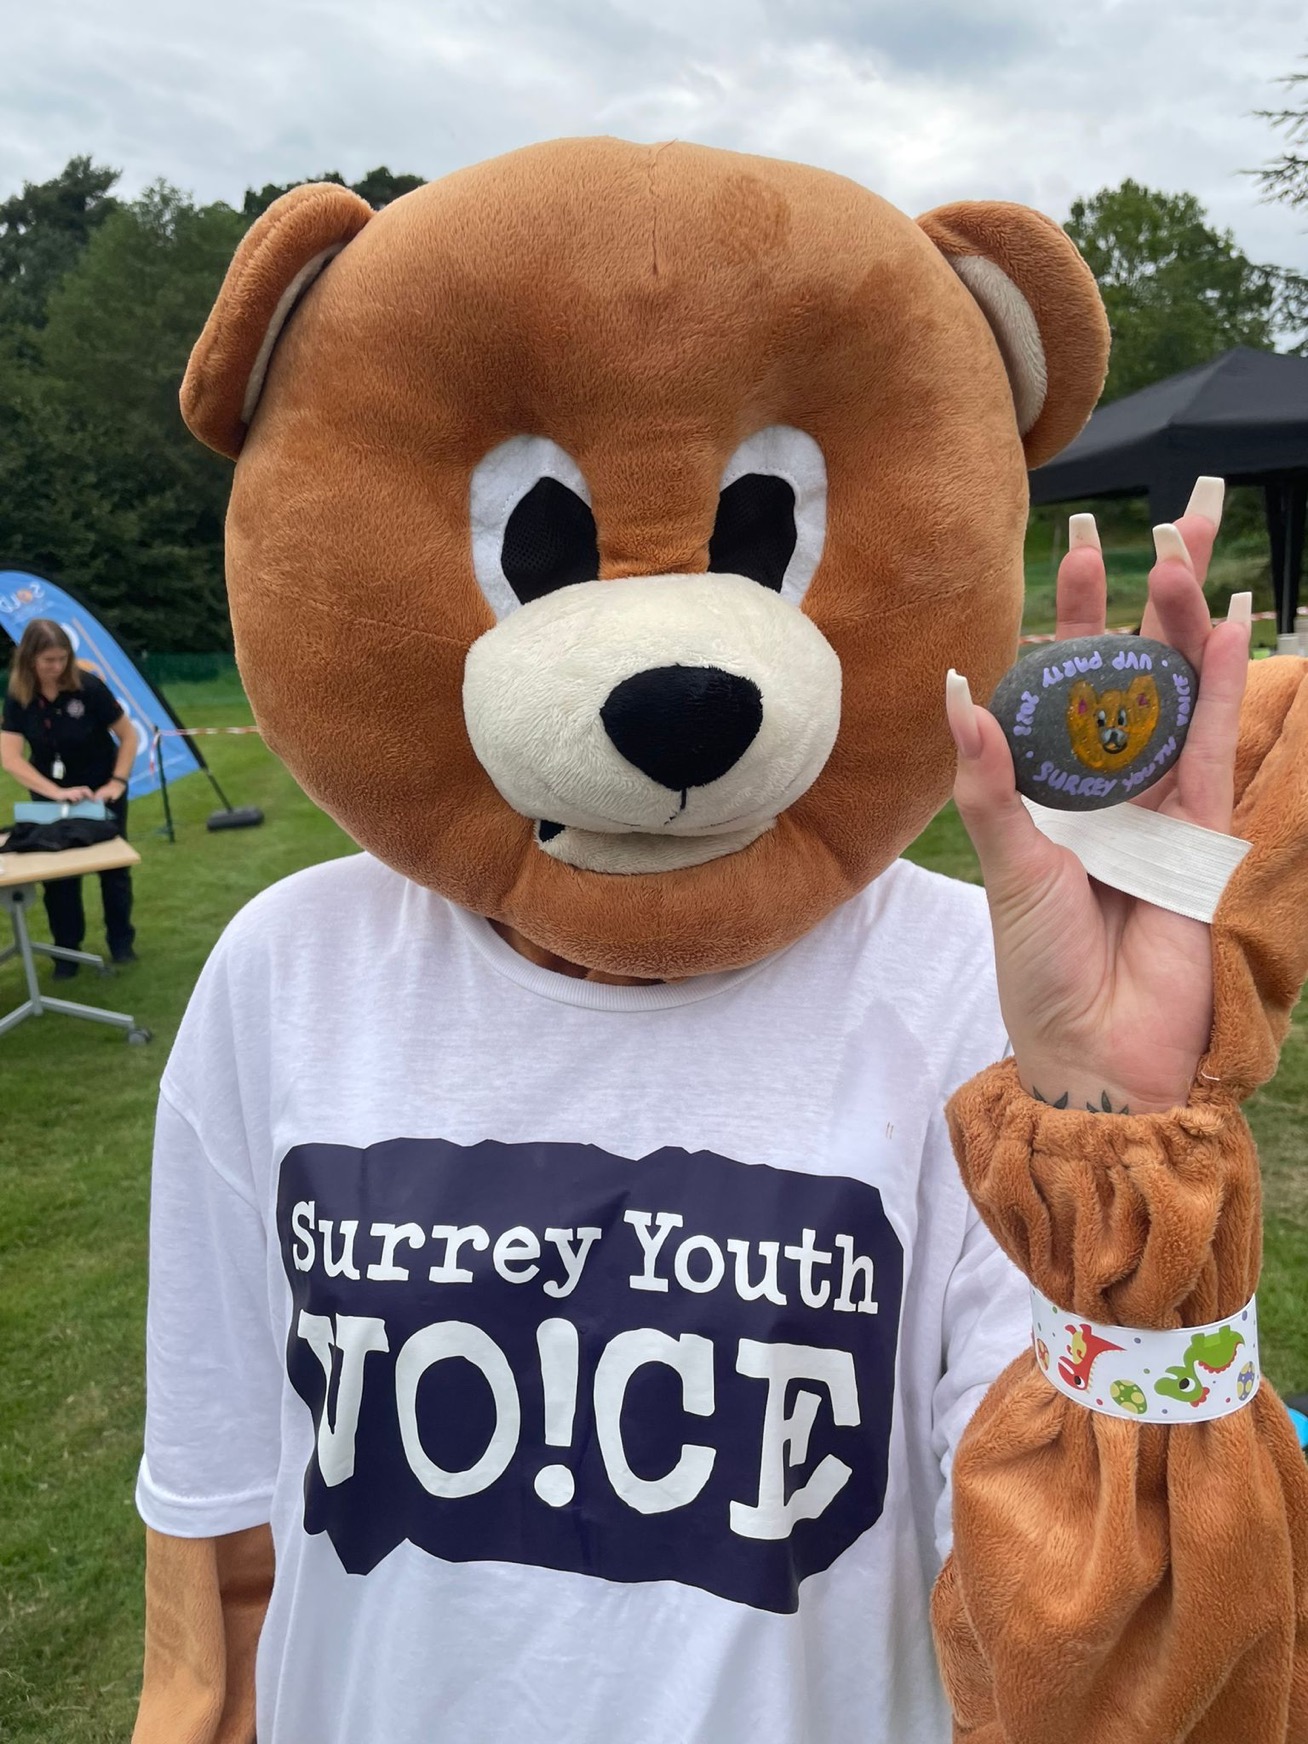 The Surrey Youth Voice mascot